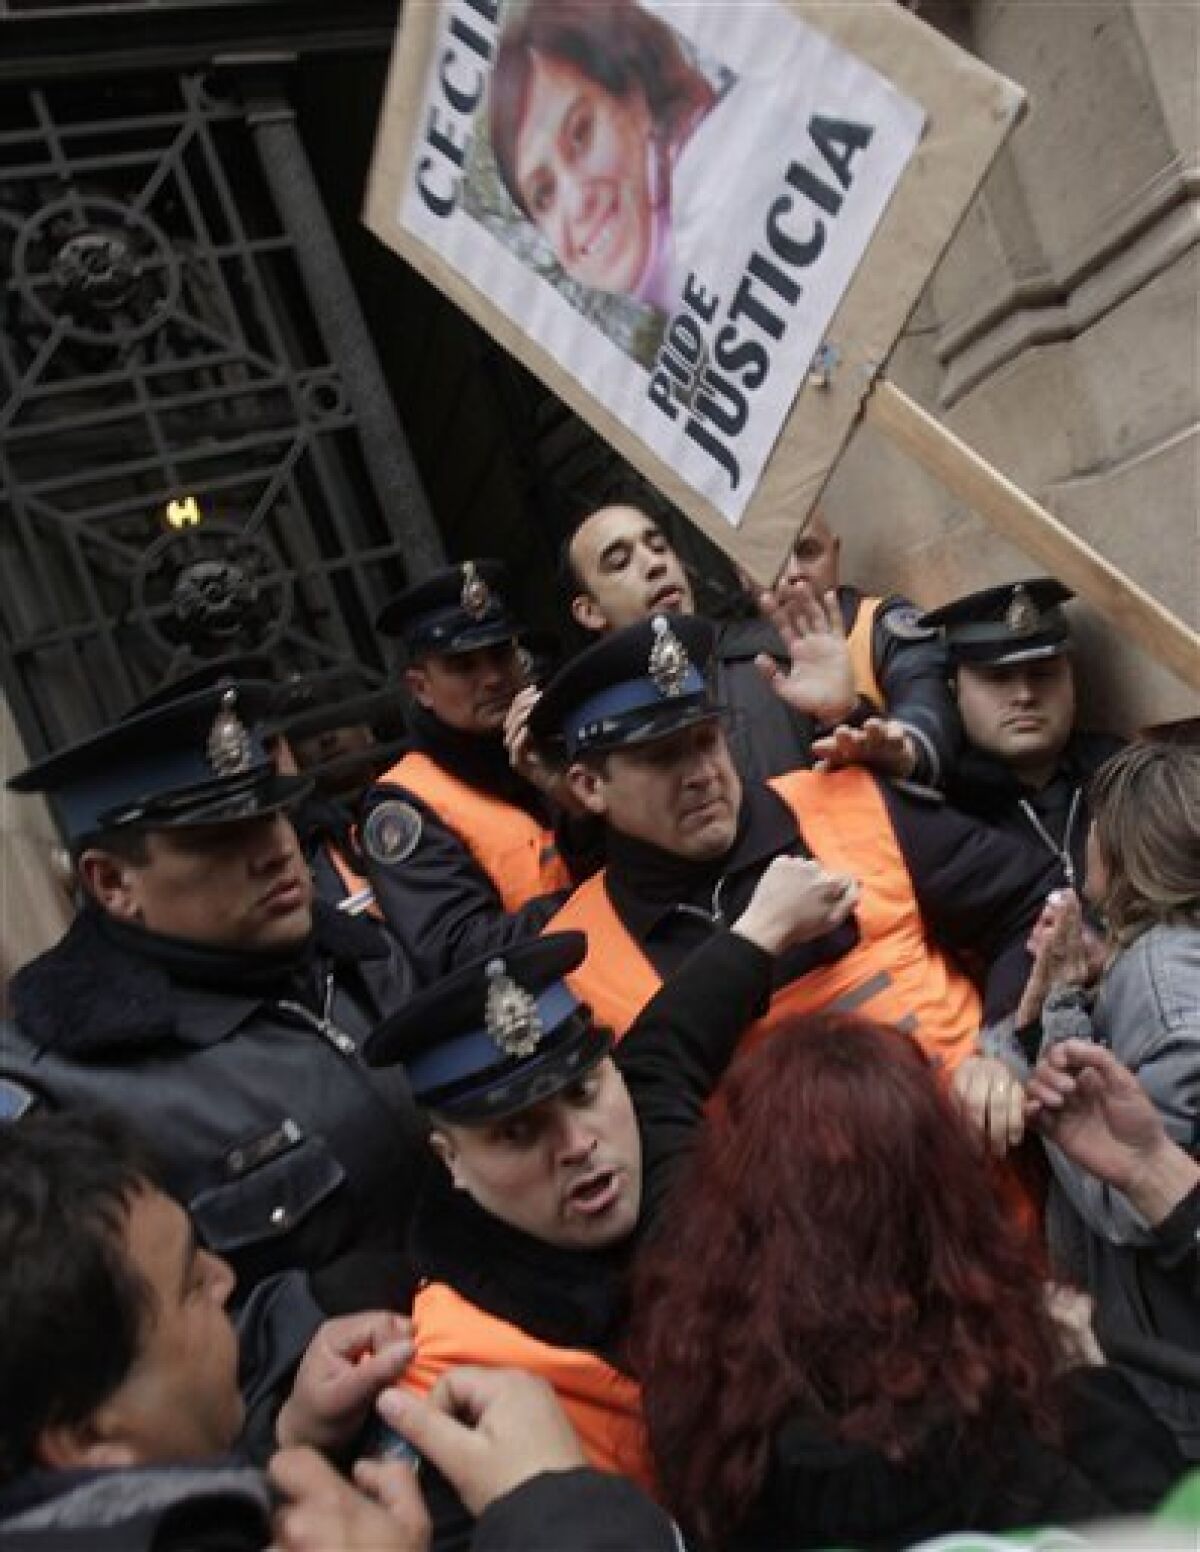 Demonstrators scuffle with police officers as they try to enter a courtroom in Buenos Aires, Wednesday, Aug. 19, 2009. Concert promoters, a police supervisor, city inspectors and a band manager were convicted and given prison terms in the 2004 Cromagnon nightclub fire that killed around 190 people. (AP Photo/Natacha Pisarenko)